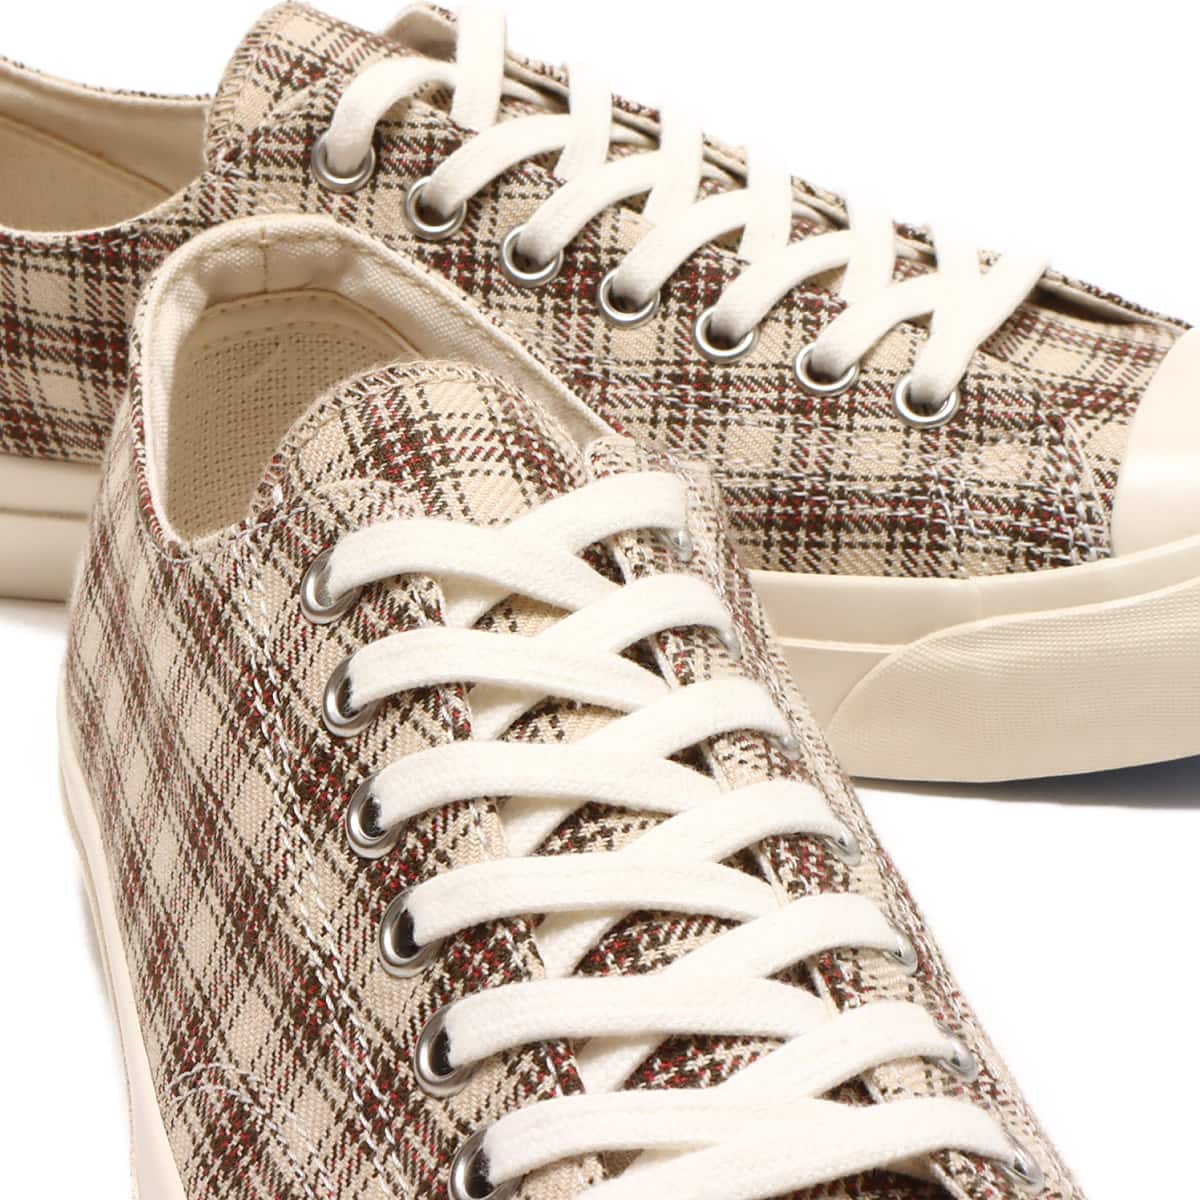 CONVERSE JACK PURCELL US CHECK BEIGE 23SS-I